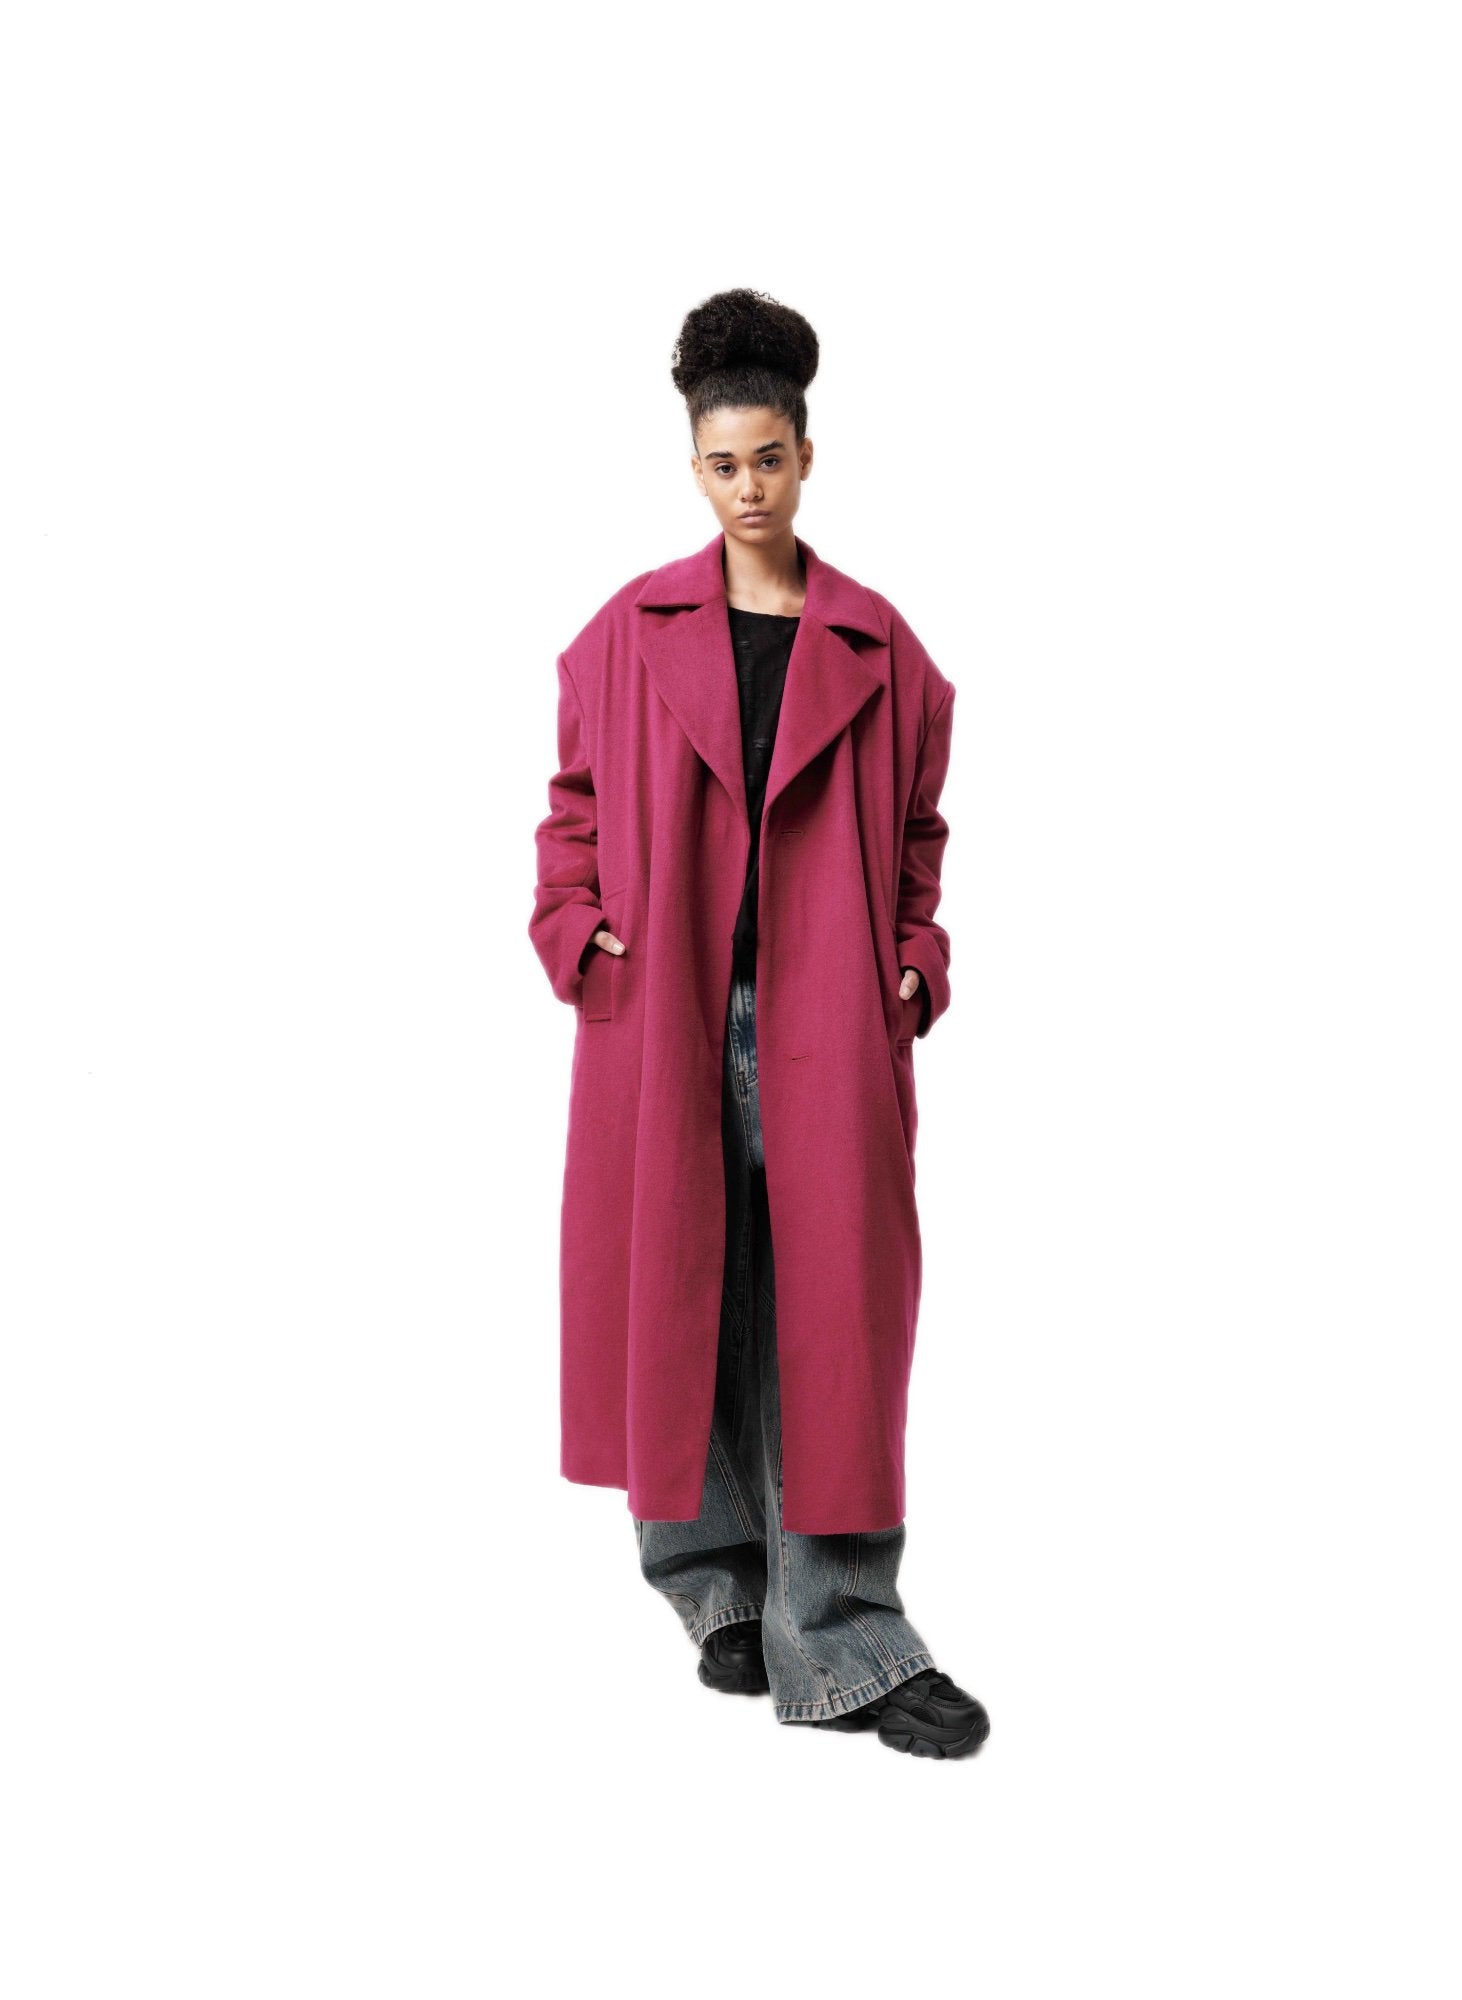 VANN VALRENCÉ Berry Purple Loose Fit Woolen Coat | MADA IN CHINA